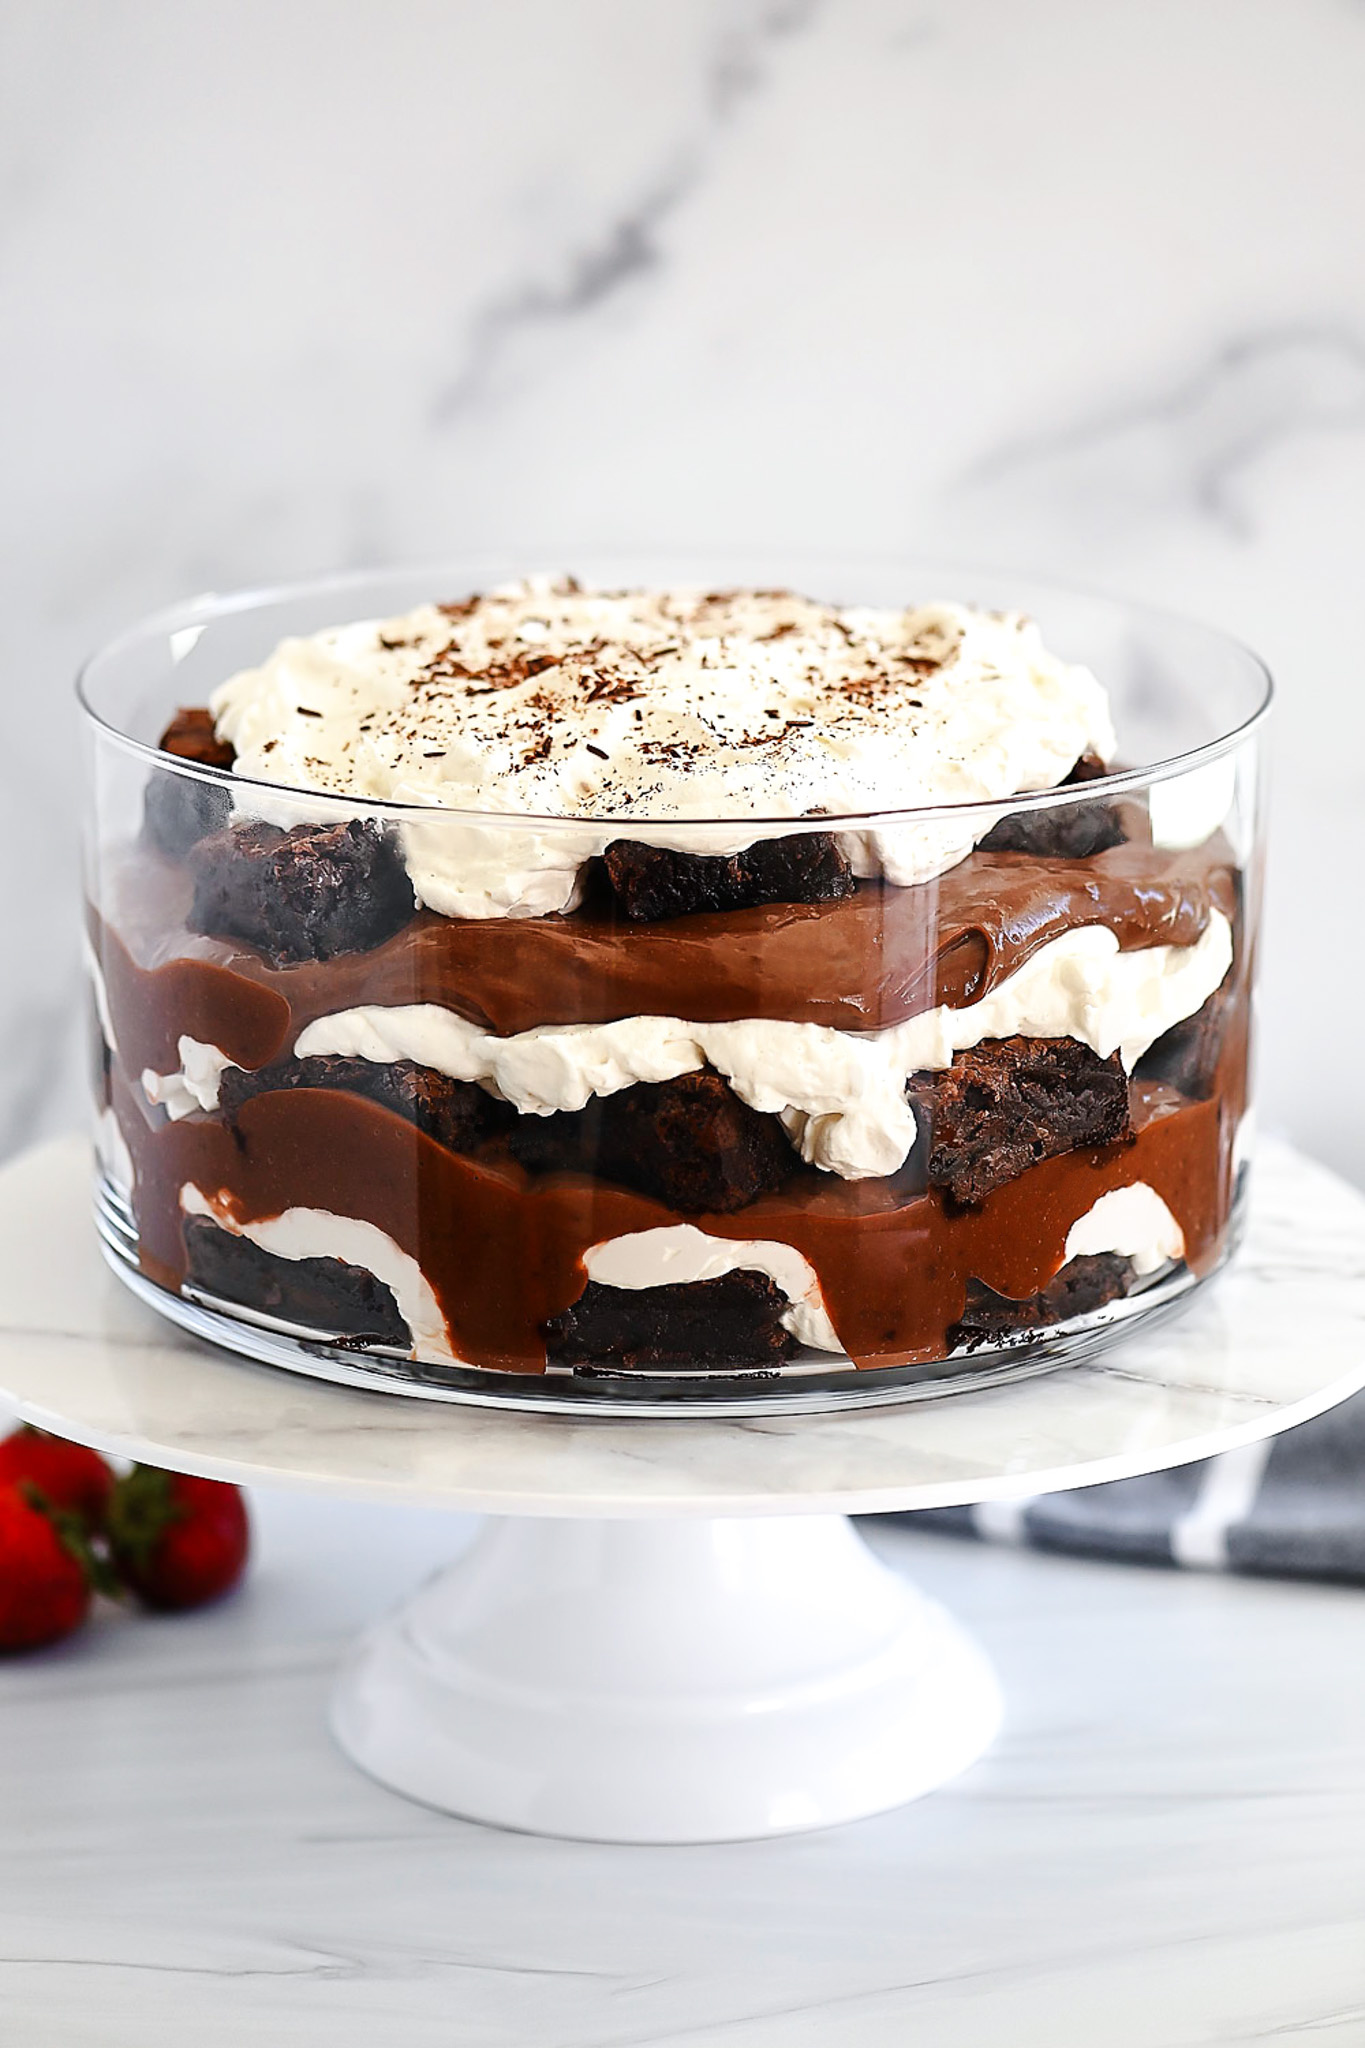 Layers of chocolate pudding, brownies and fresh whipped cream are inside this Brownie Trifle. Life-In-The-Lofthouse.com